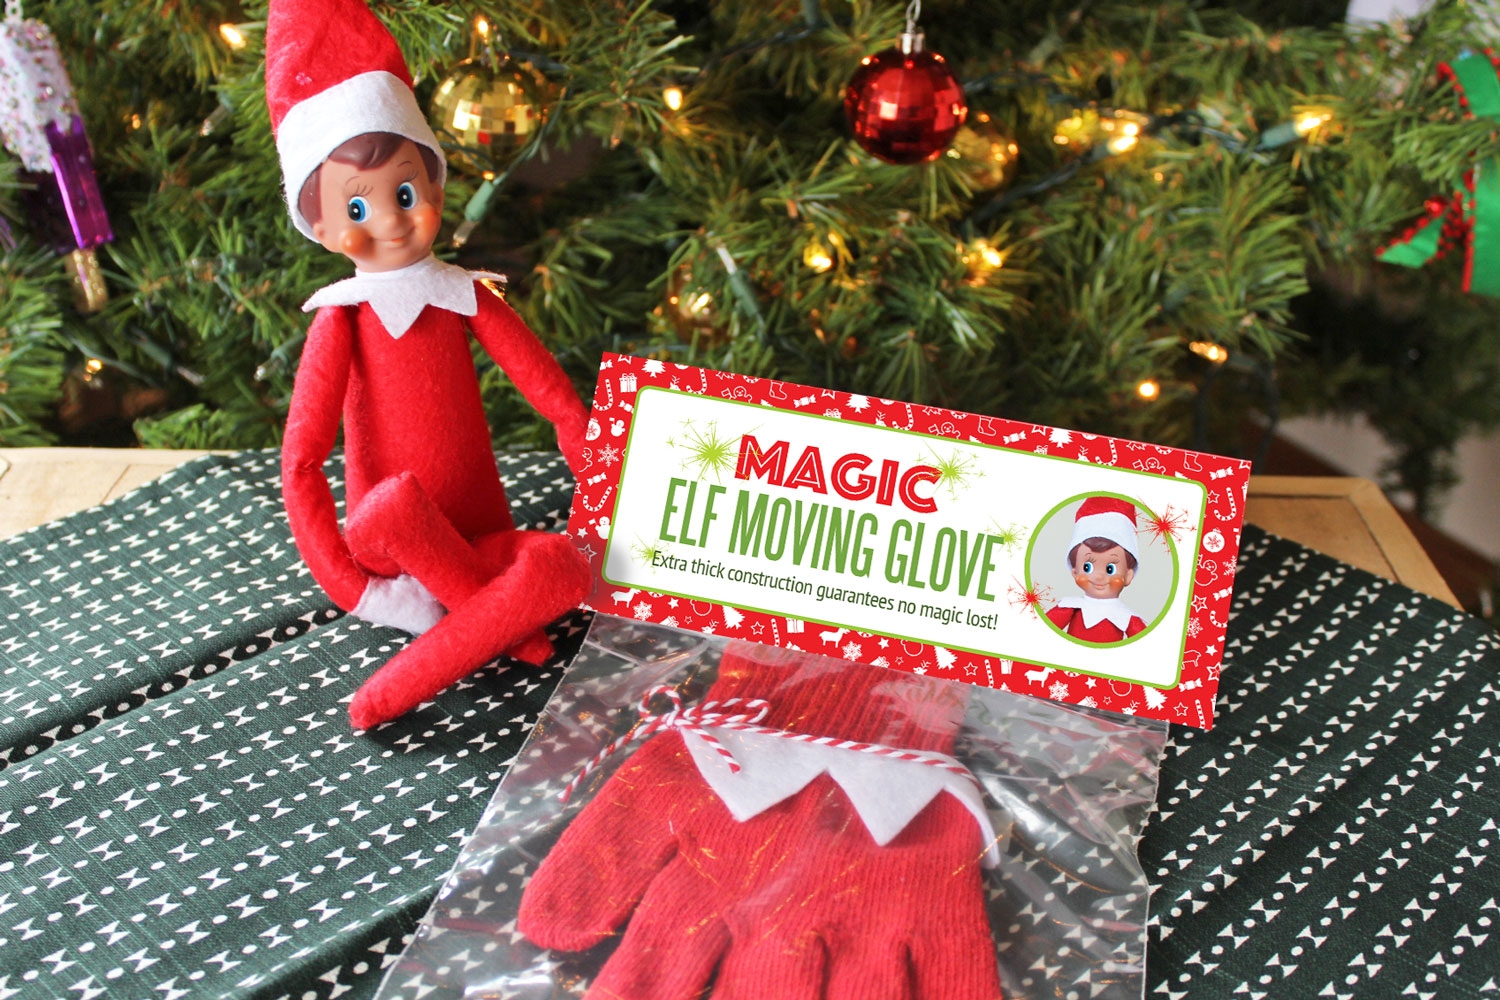 DIY Magic Elf On The Shelf Moving Glove With Free Printable Package How To Move An Elf On The Shelf 